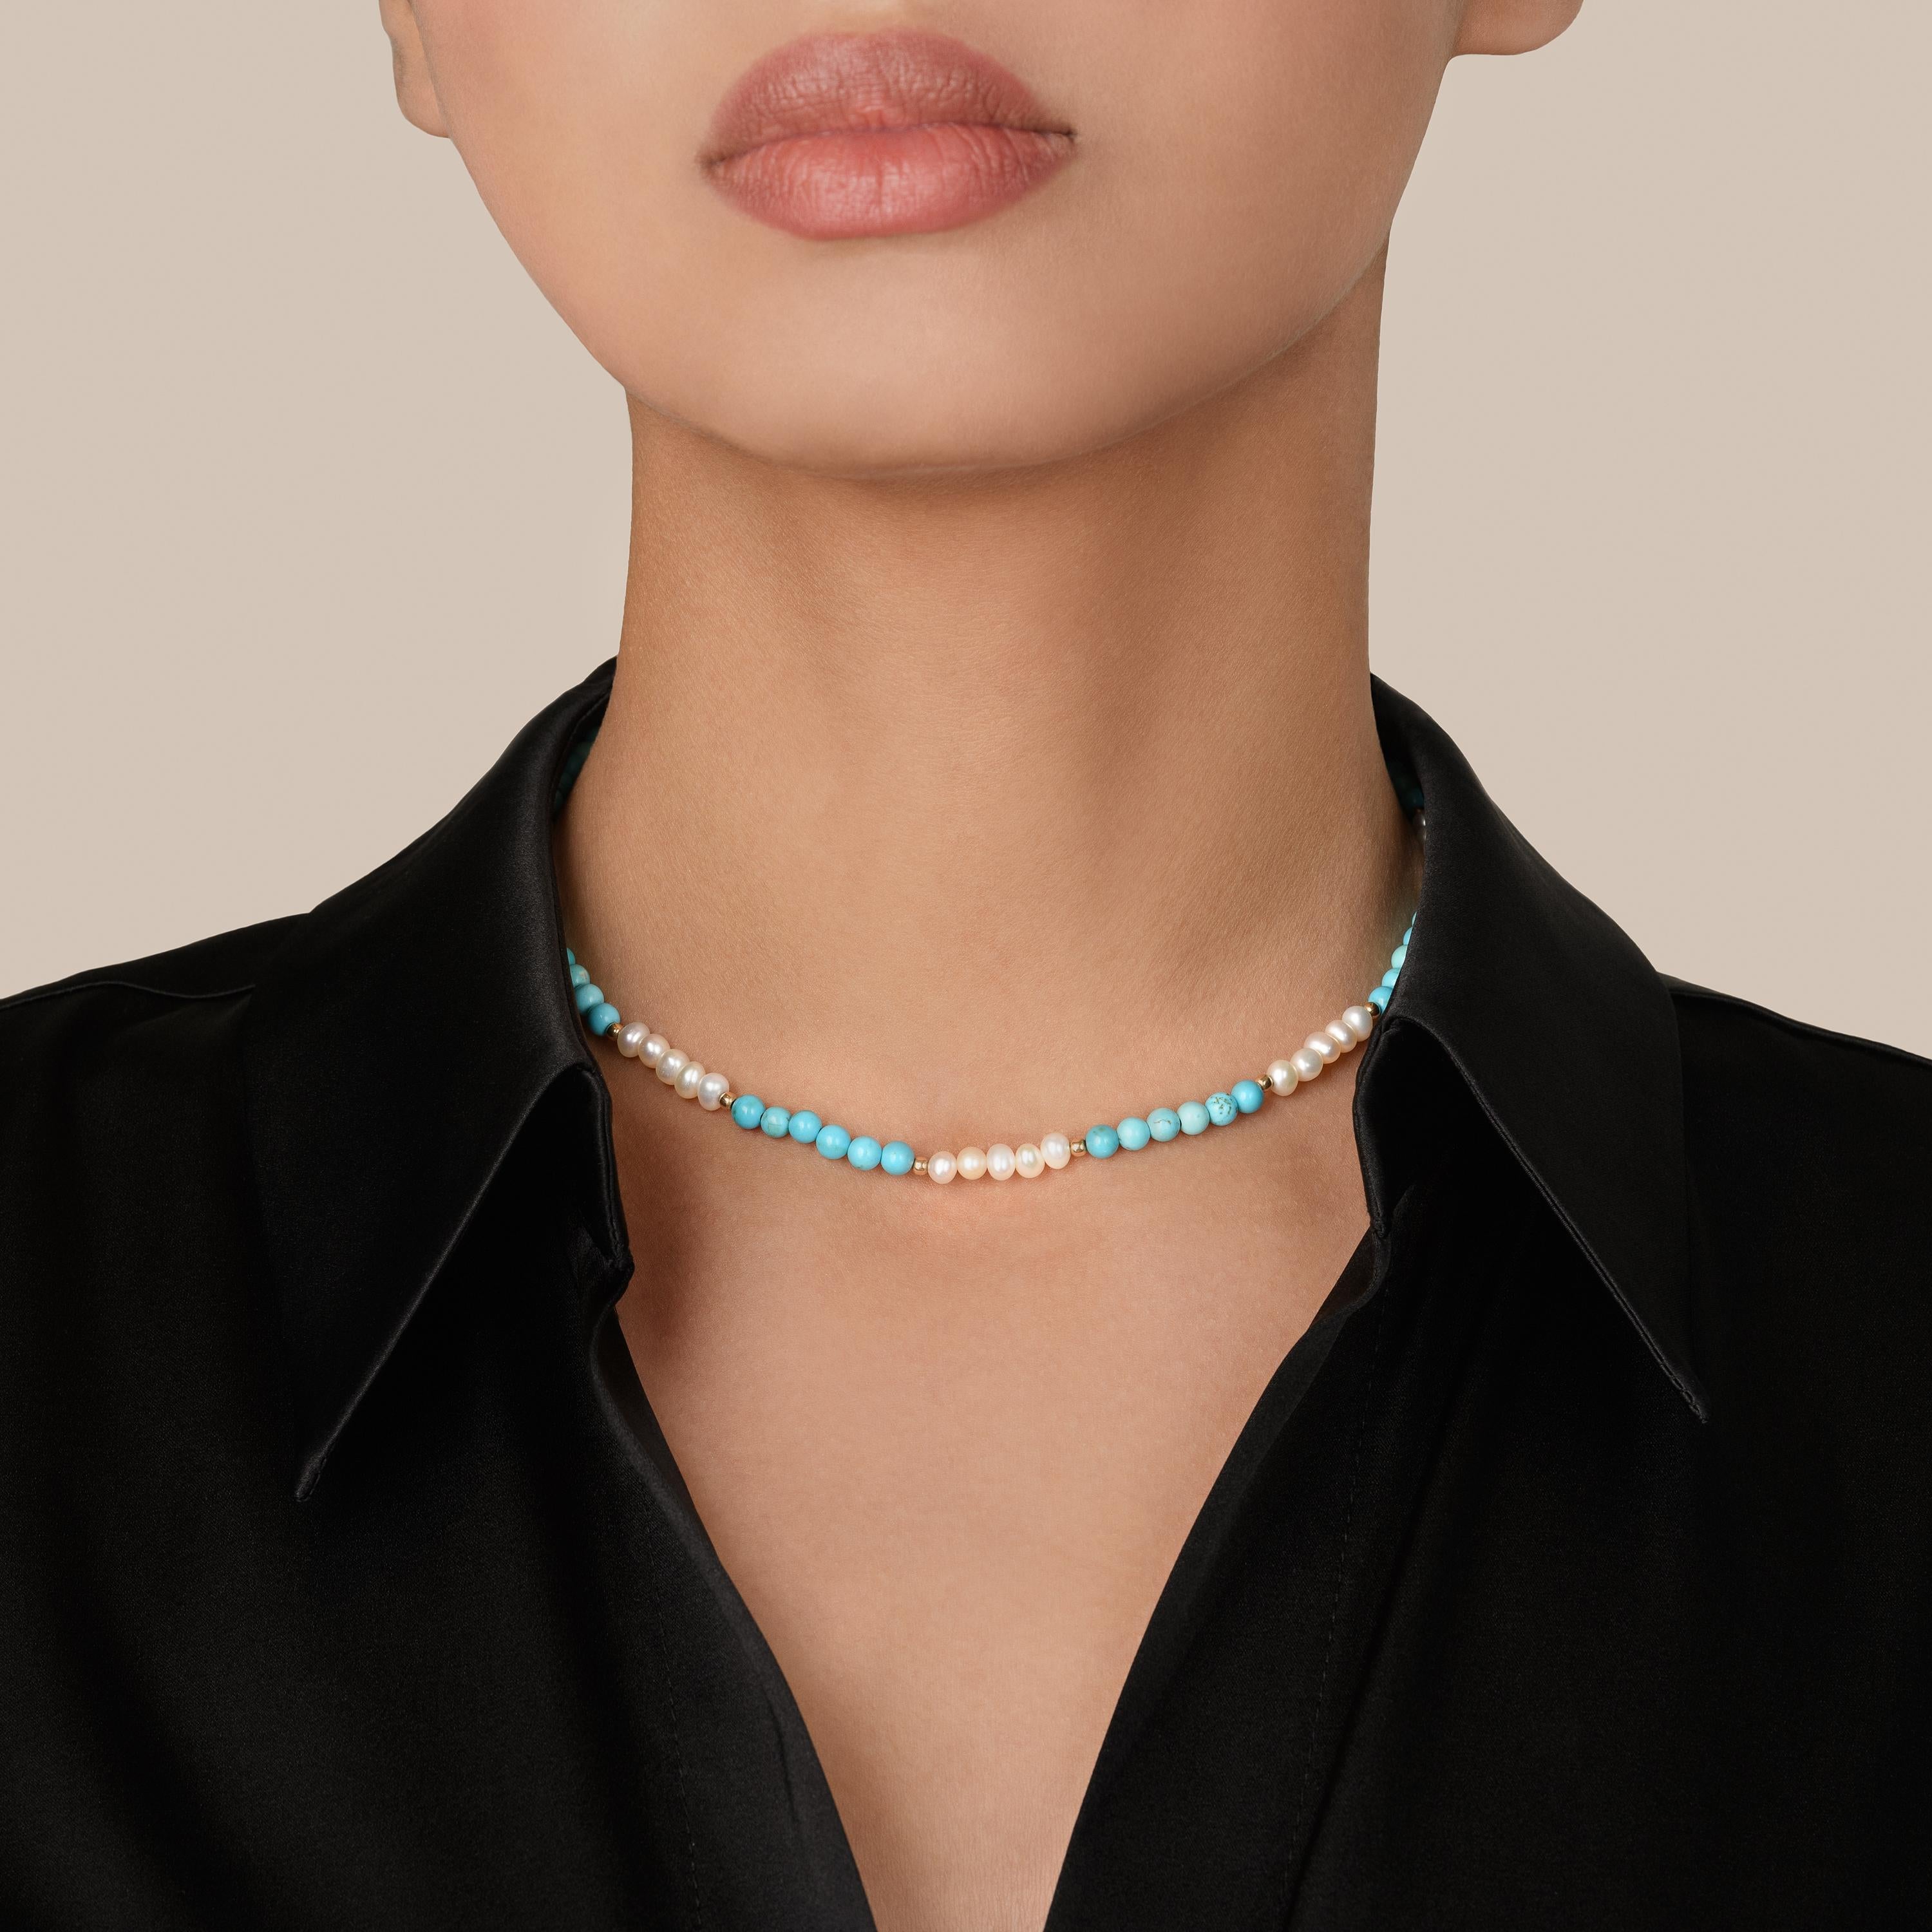 Introducing our exquisite Pearl and Turquoise Necklace, a captivating blend of elegance and modern allure. This enchanting piece features luminous pearls, complemented by vibrant turquoise accents. It is a celebration of timeless beauty with a